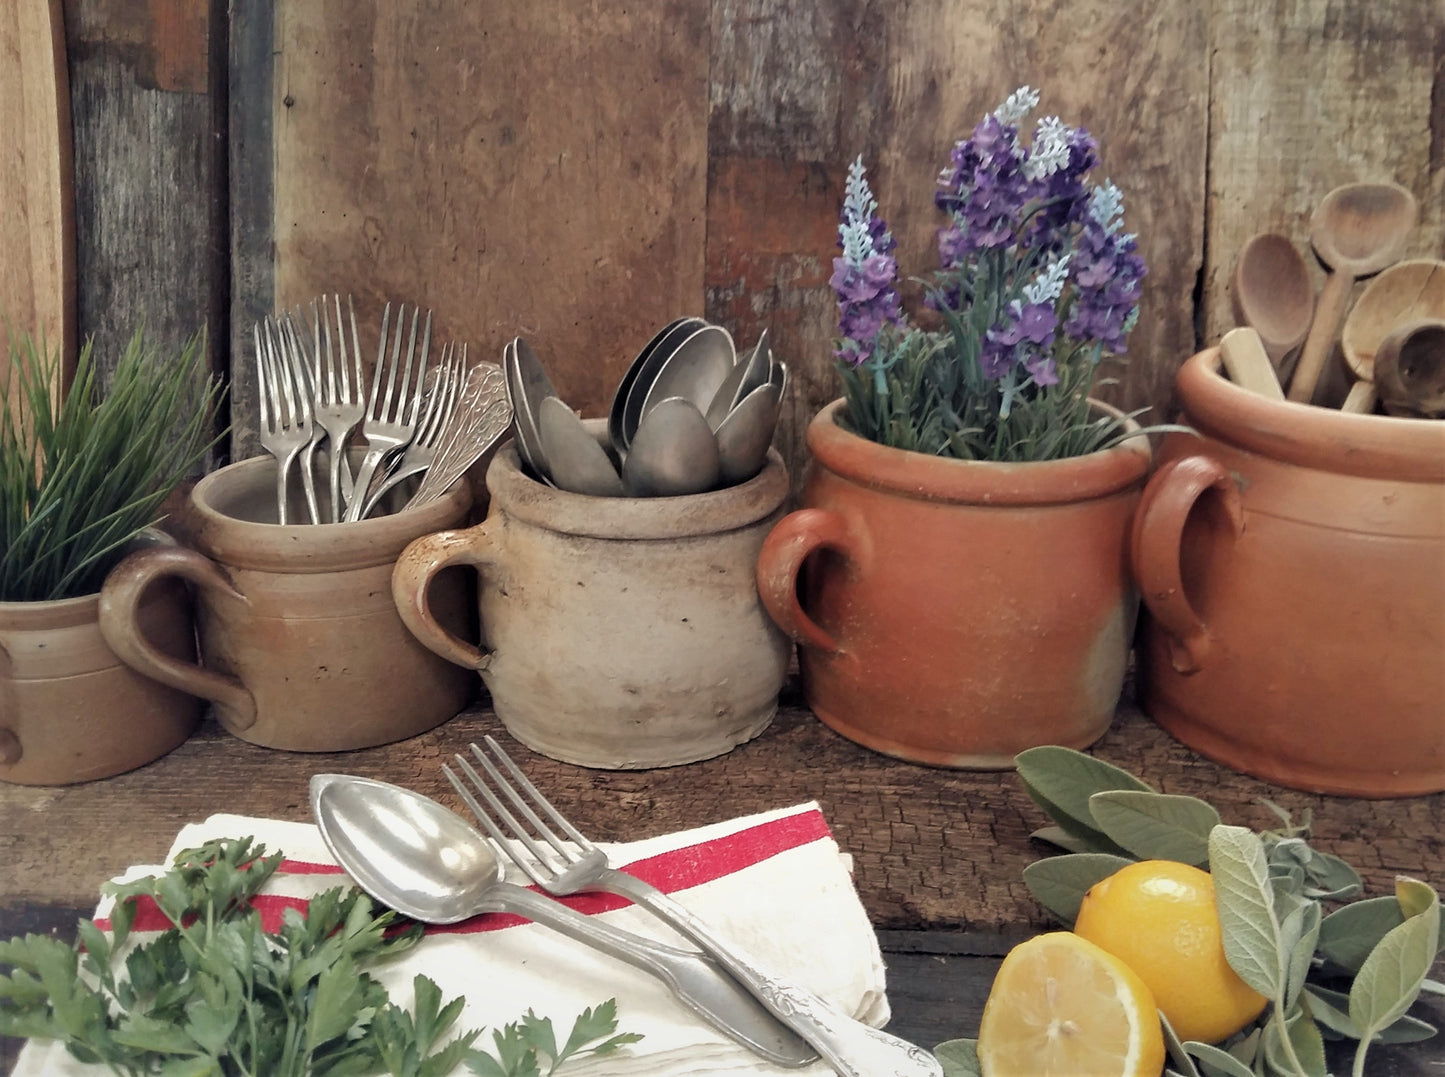 Five French Confit Pots. Kitchen Herb Planters/ Utensil Storage Jars. from Tiggy & Pip - €275.00! Shop now at Tiggy and Pip